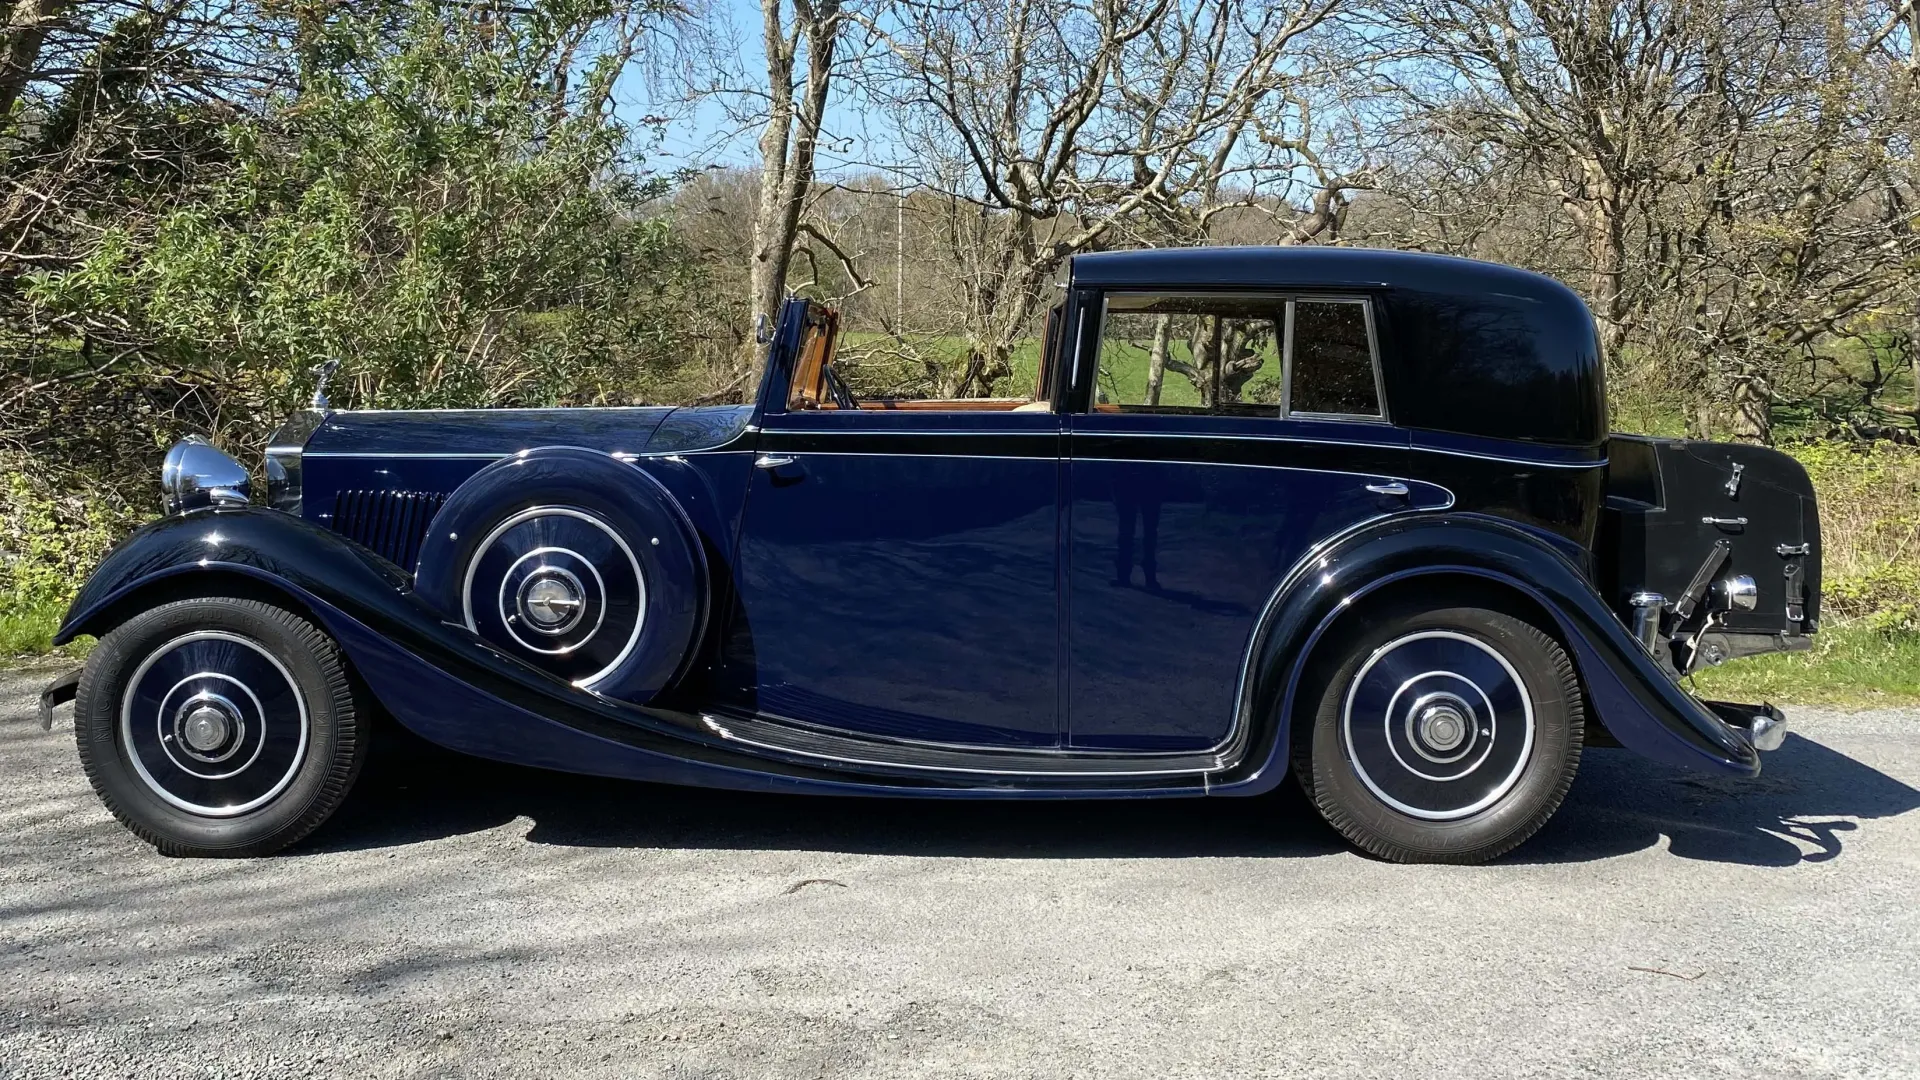 Left Side view of vintage Rolls-Royce Sedanca de Ville in Blue showing the black picinic trunk at the rear